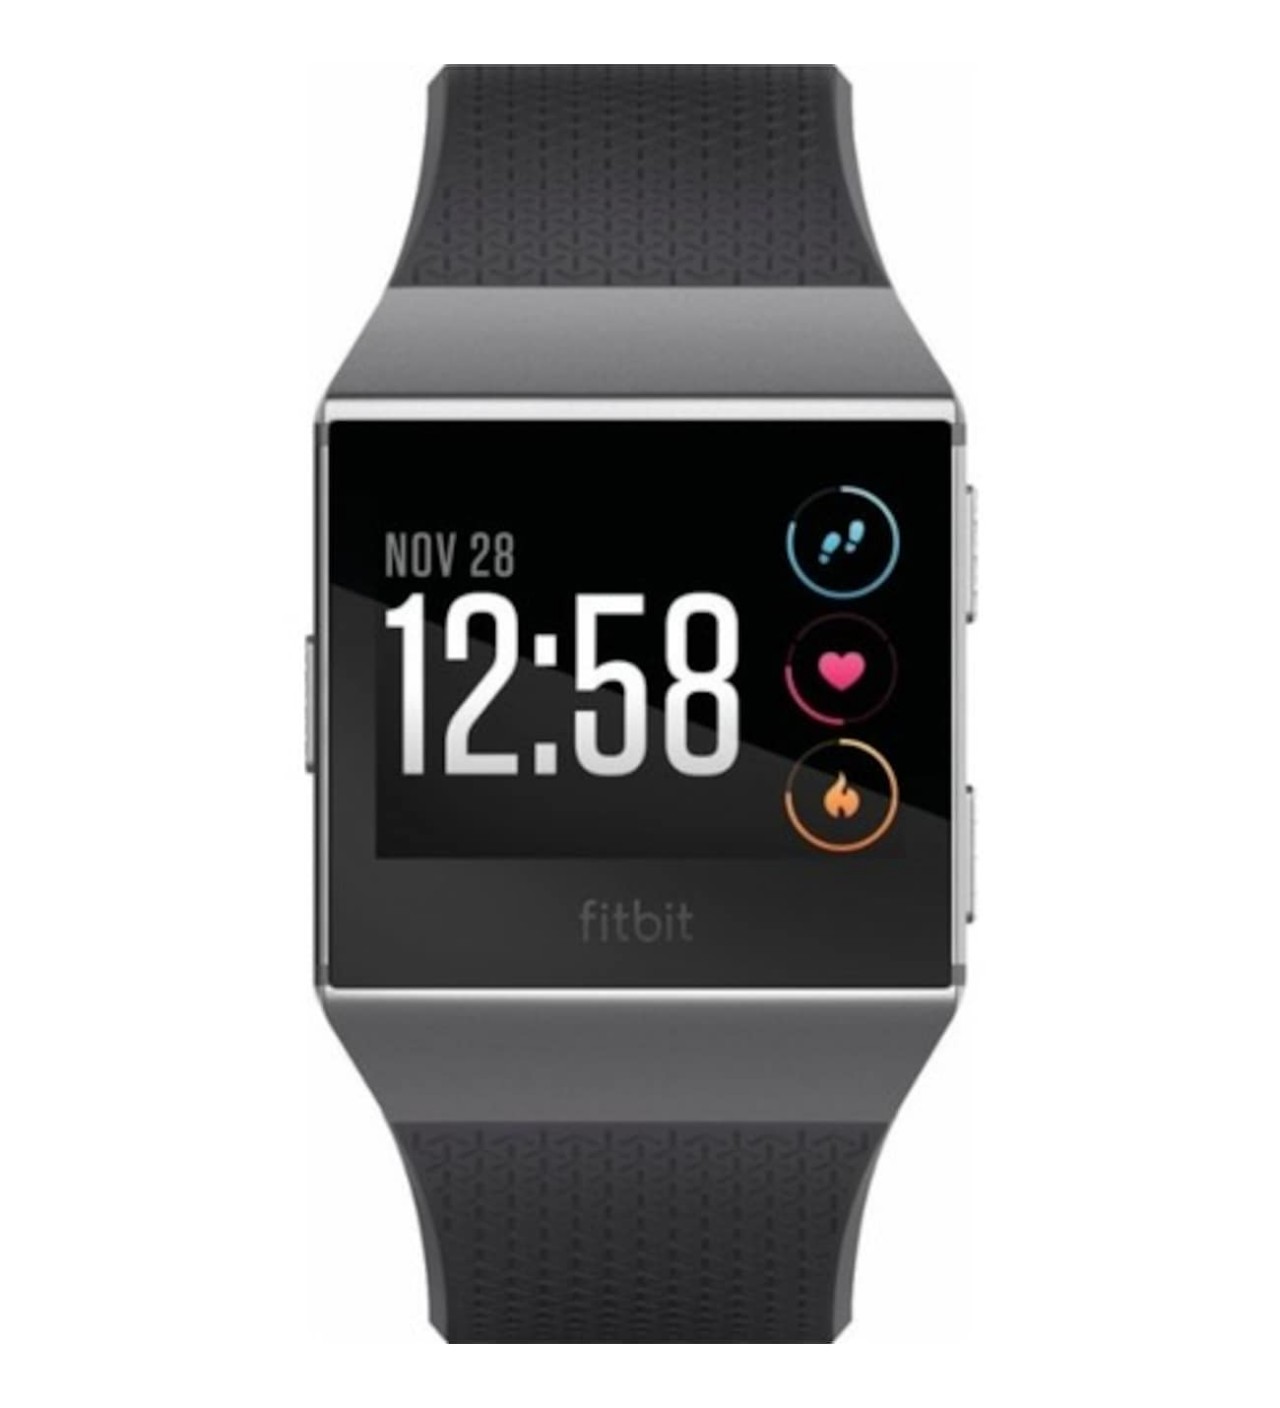 The Fitbit Ionic has a battery life